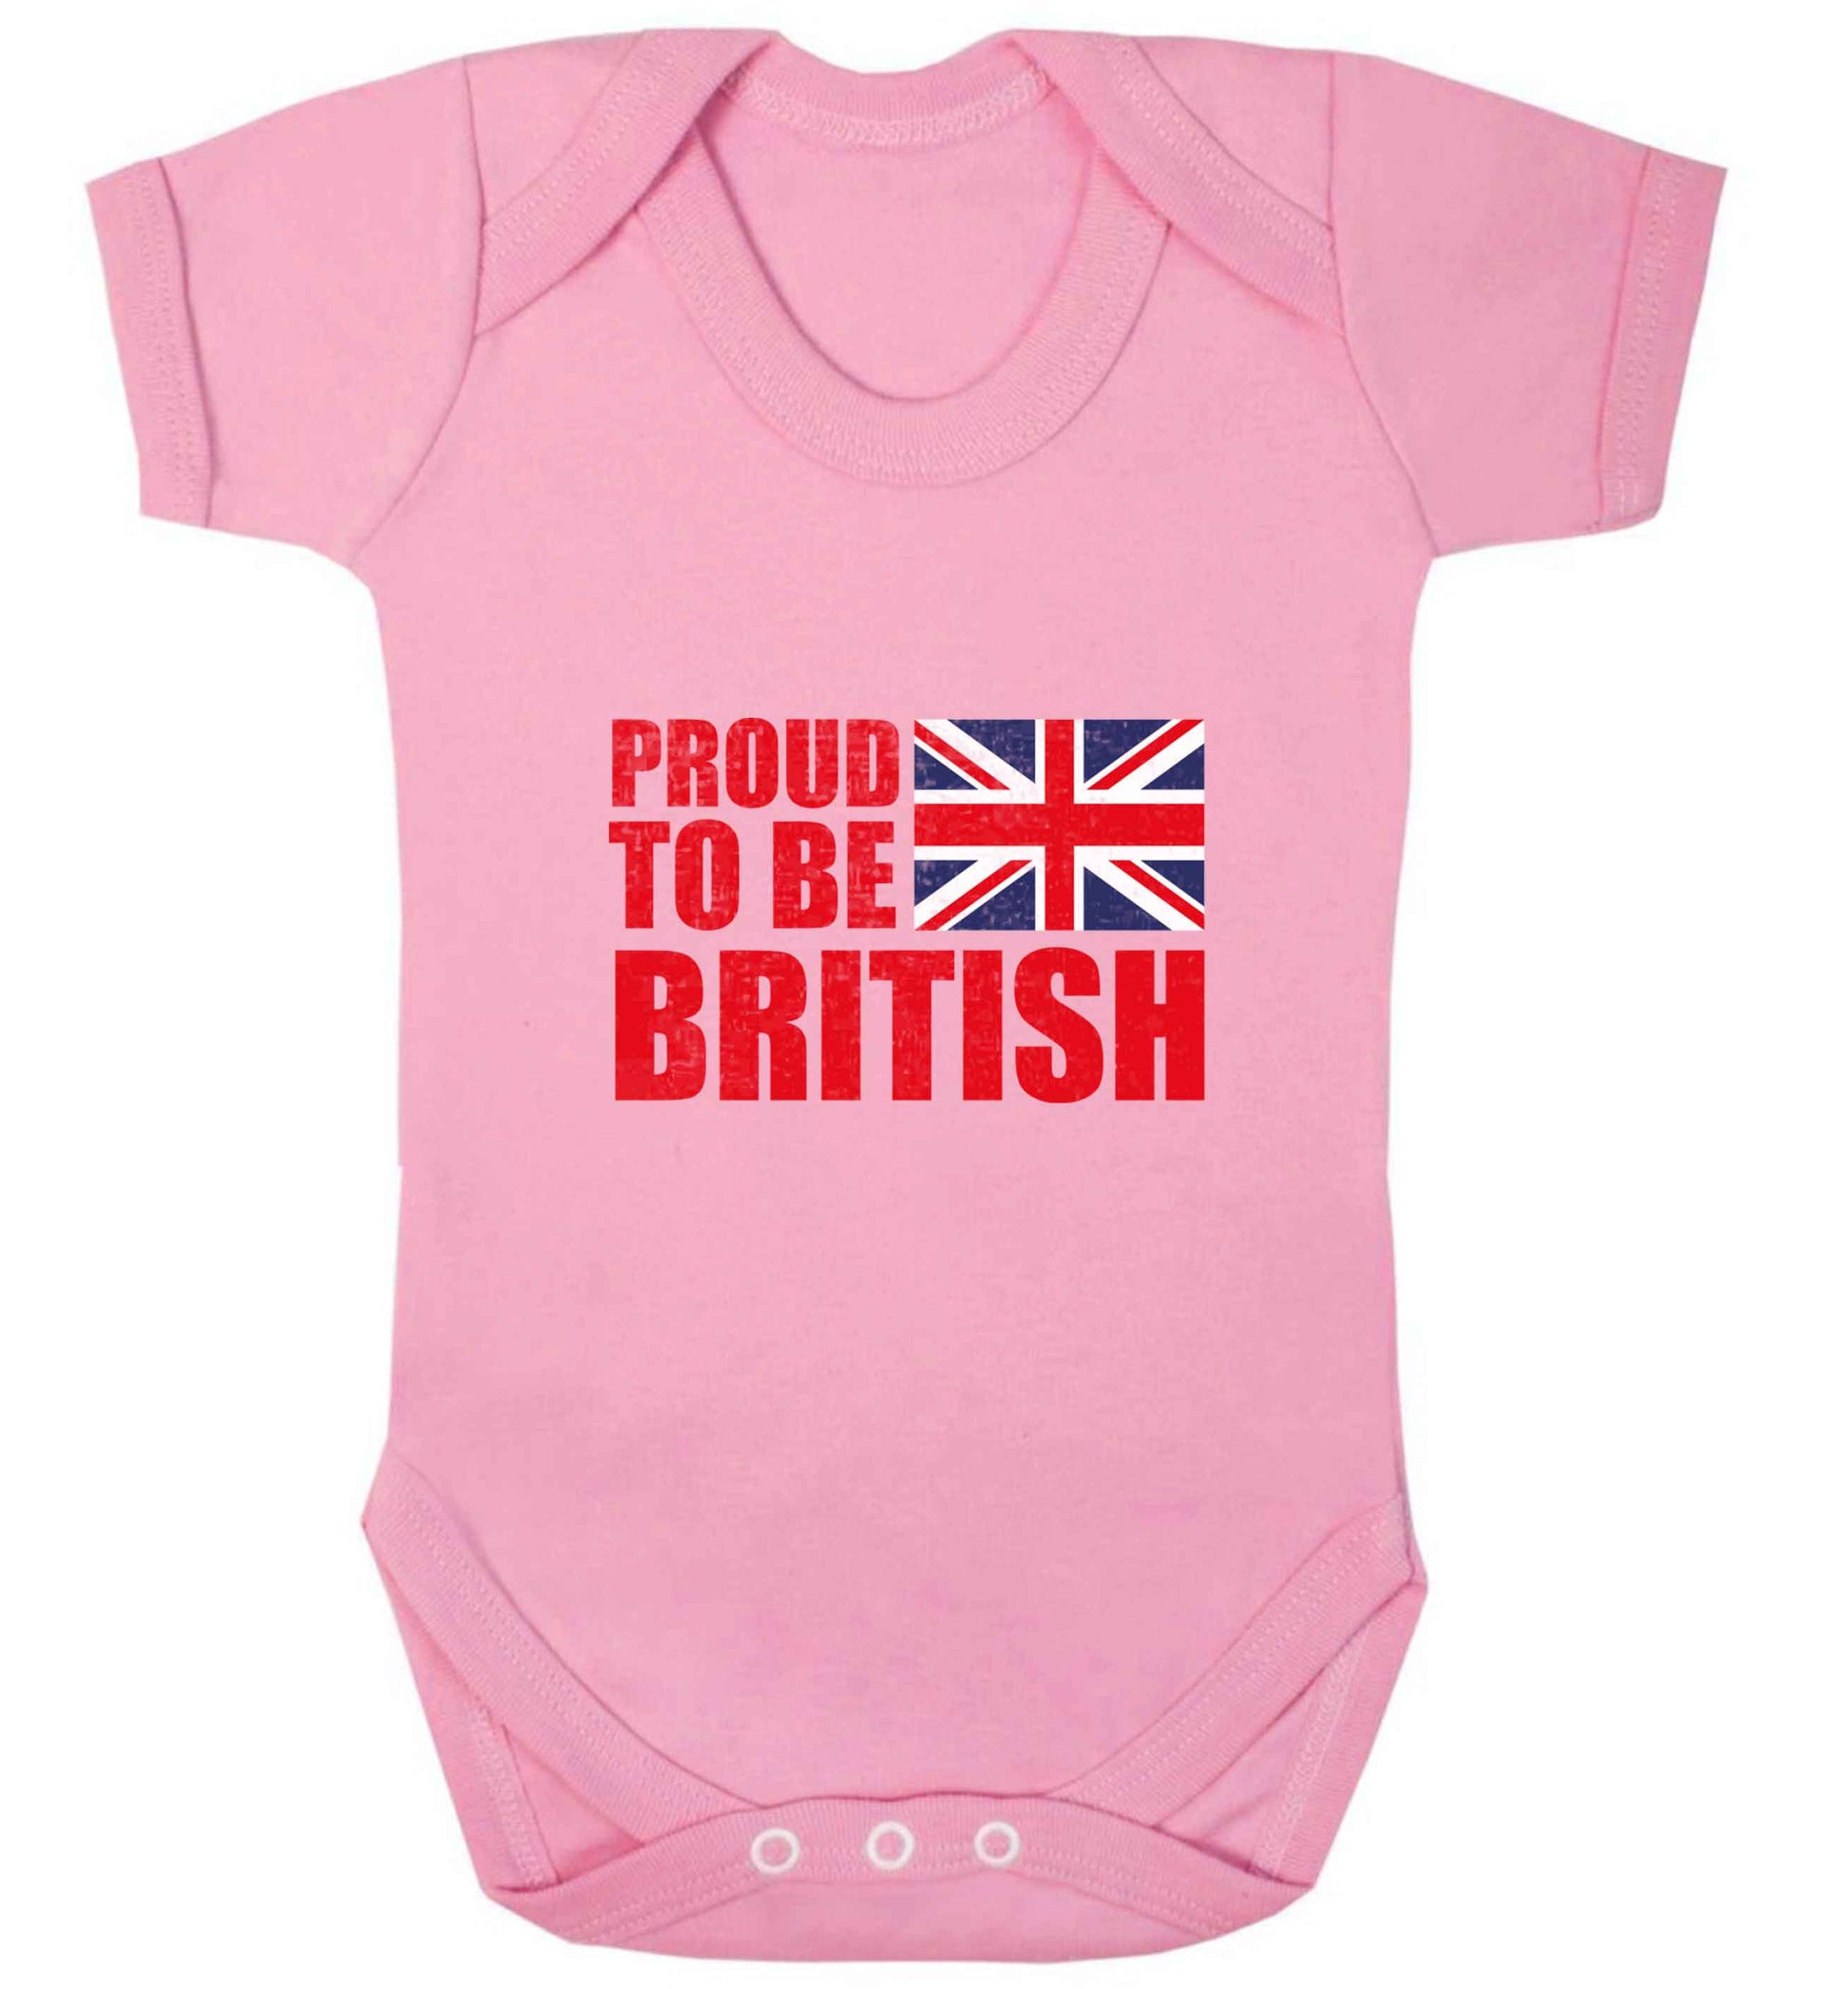 Proud to be British baby vest pale pink 18-24 months